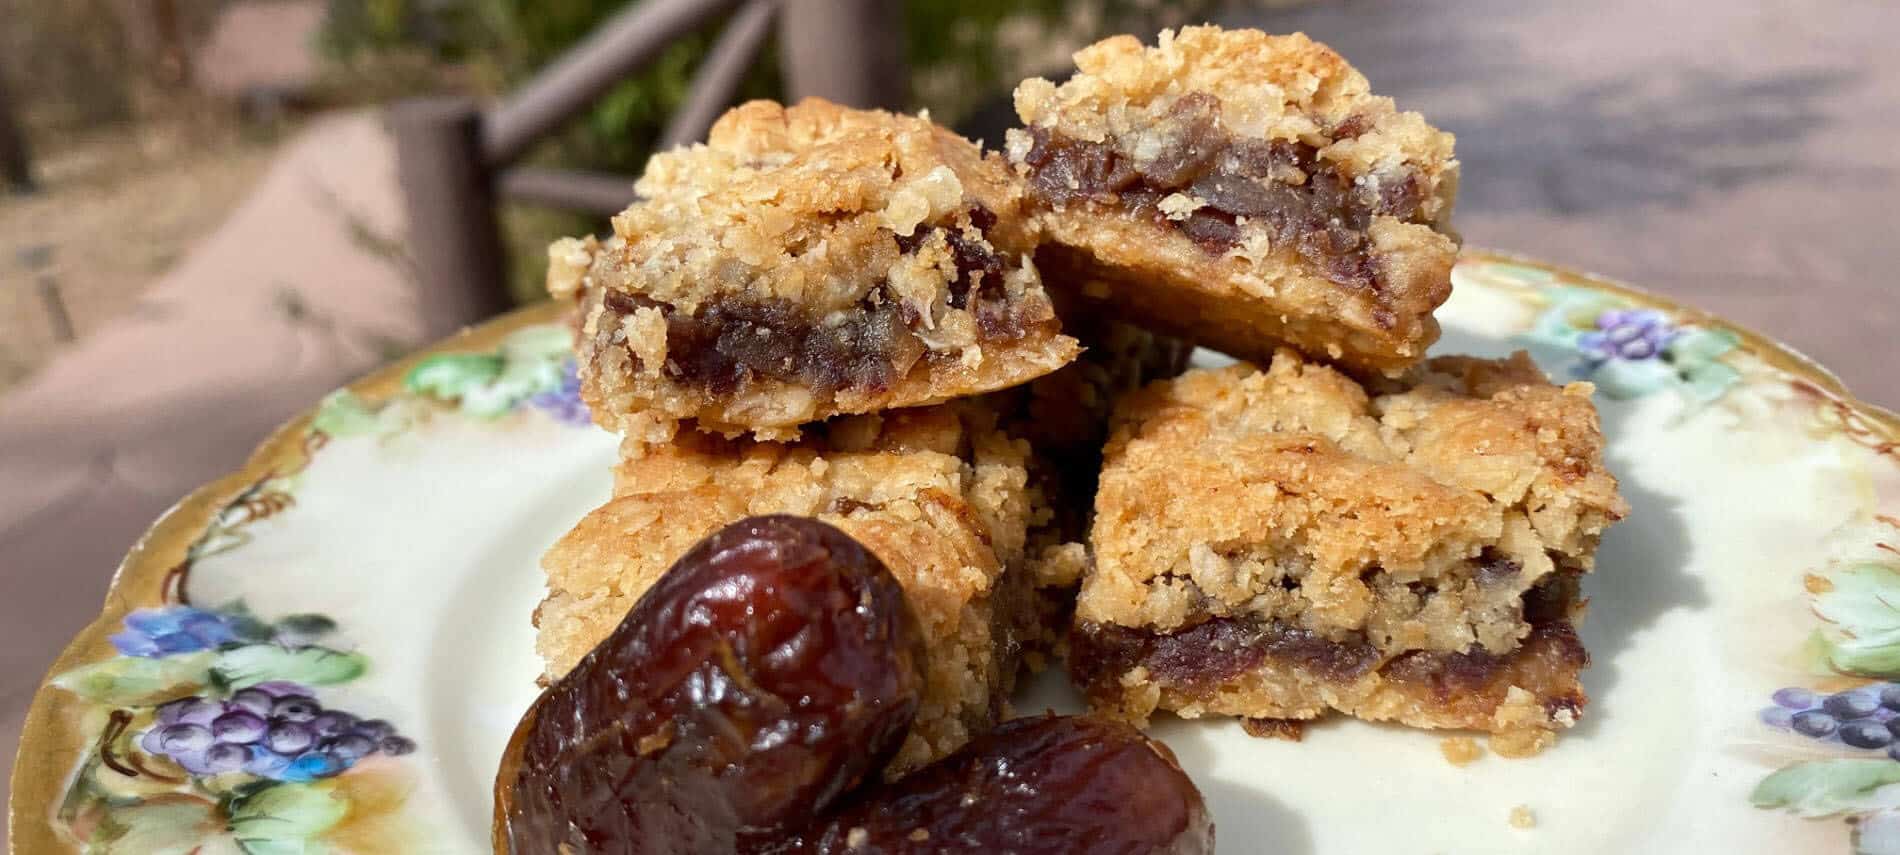 Golden Oat cookies filled with a sweet date filling, garnished with additional dates